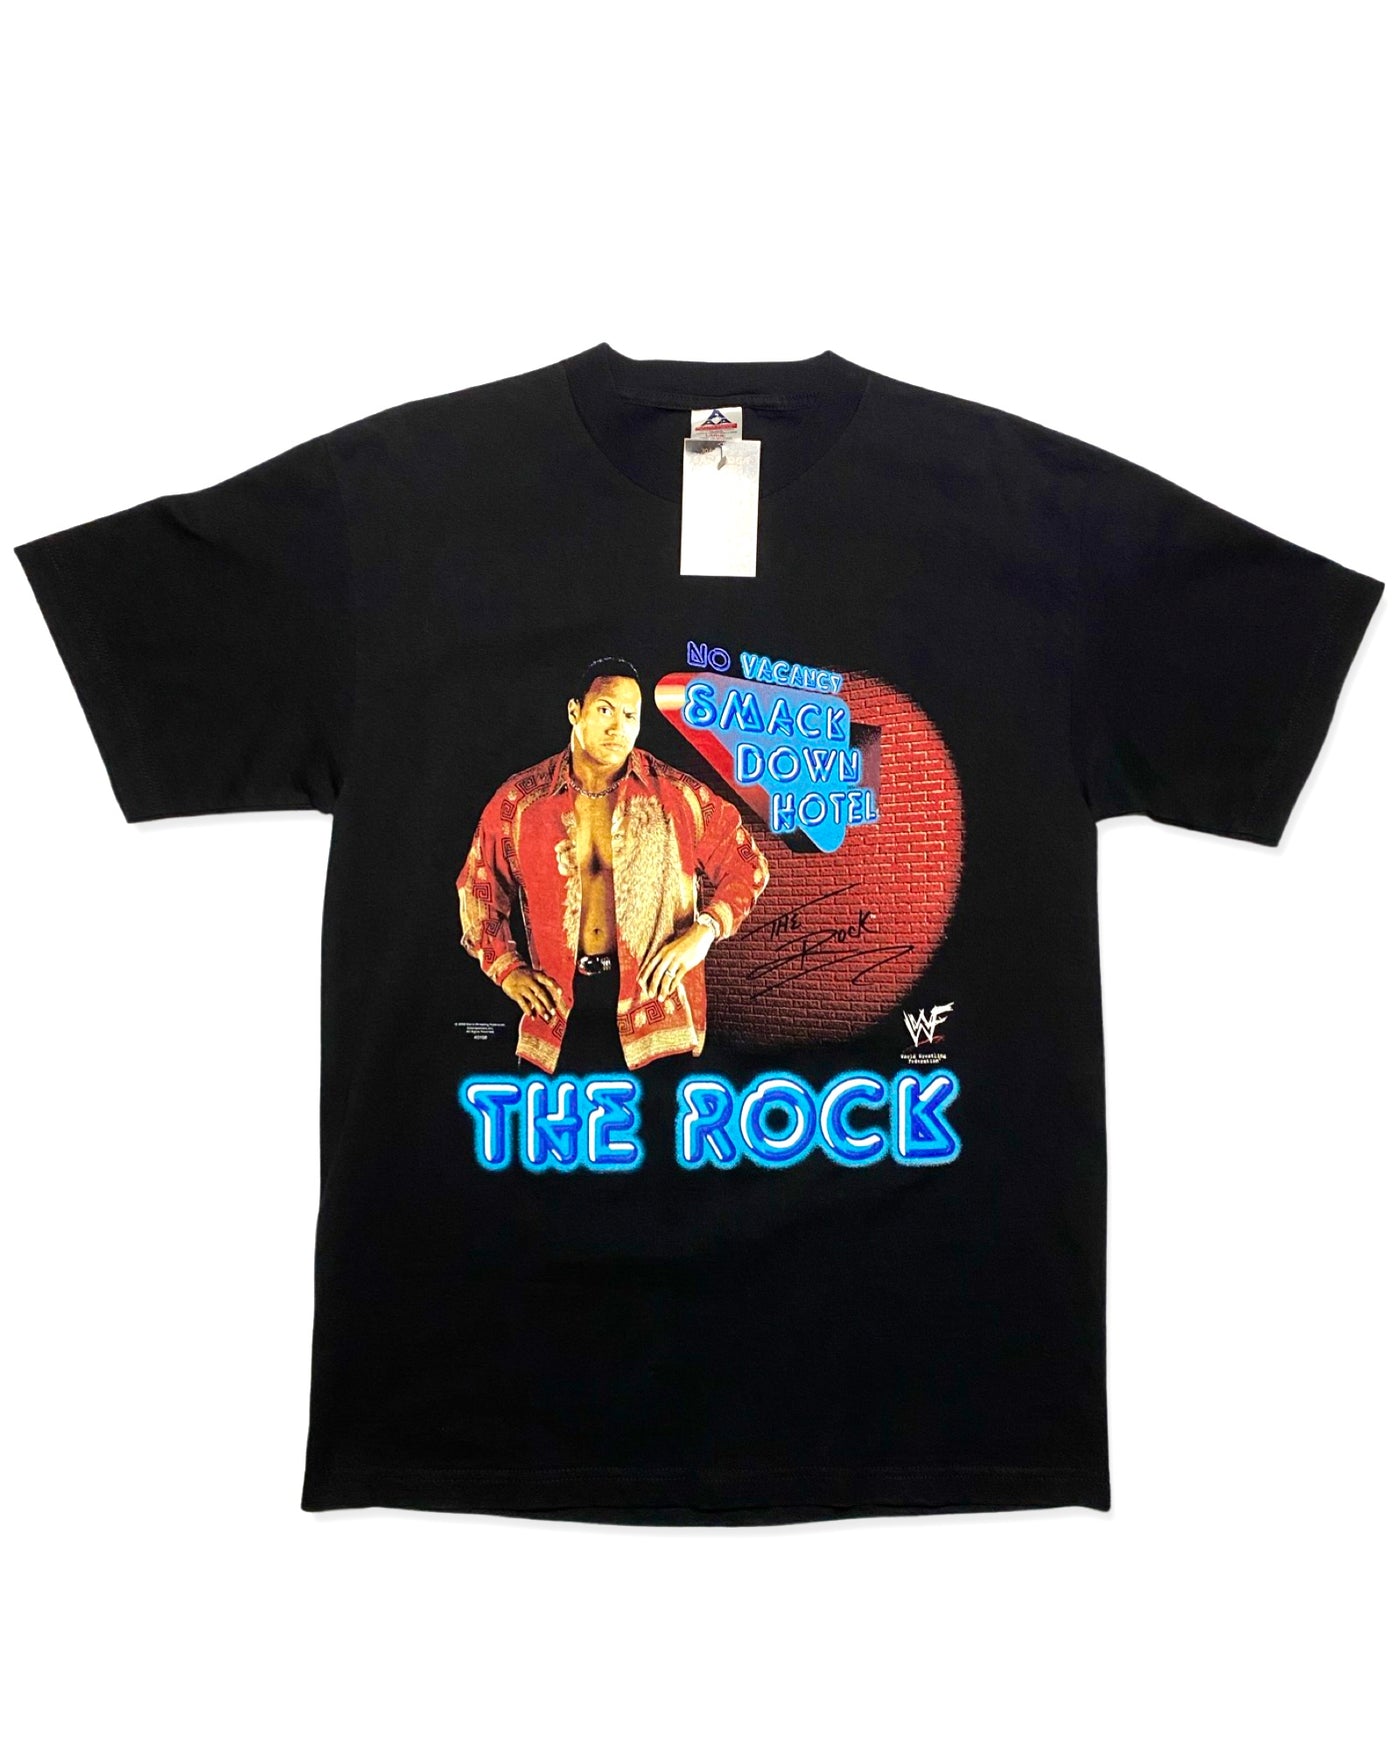 Vintage 2000 The Rock Smack Down Hotel T-Shirt